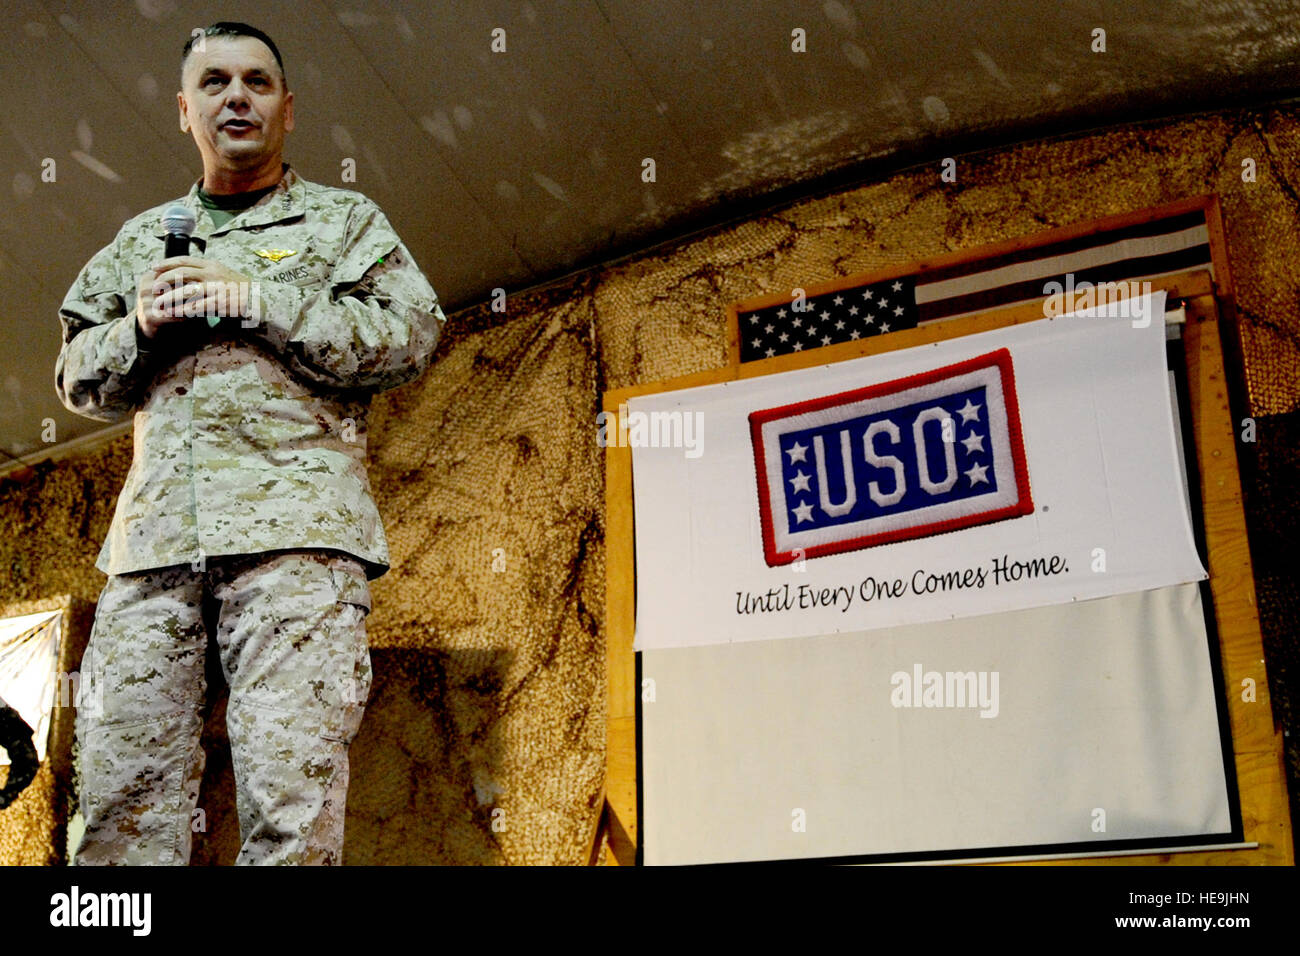 Vice Chairman of the Joint Chiefs of Staff U.S. Marine Gen. James E. Cartwright speaks to the crowd before a USO show at Bagram Air Base, Afghanistan, Nov. 13, 2008. Cartwright is on an eight-day trip with the USO group.  Air Force Master Sgt. Adam M. Stump. (Released) Stock Photo